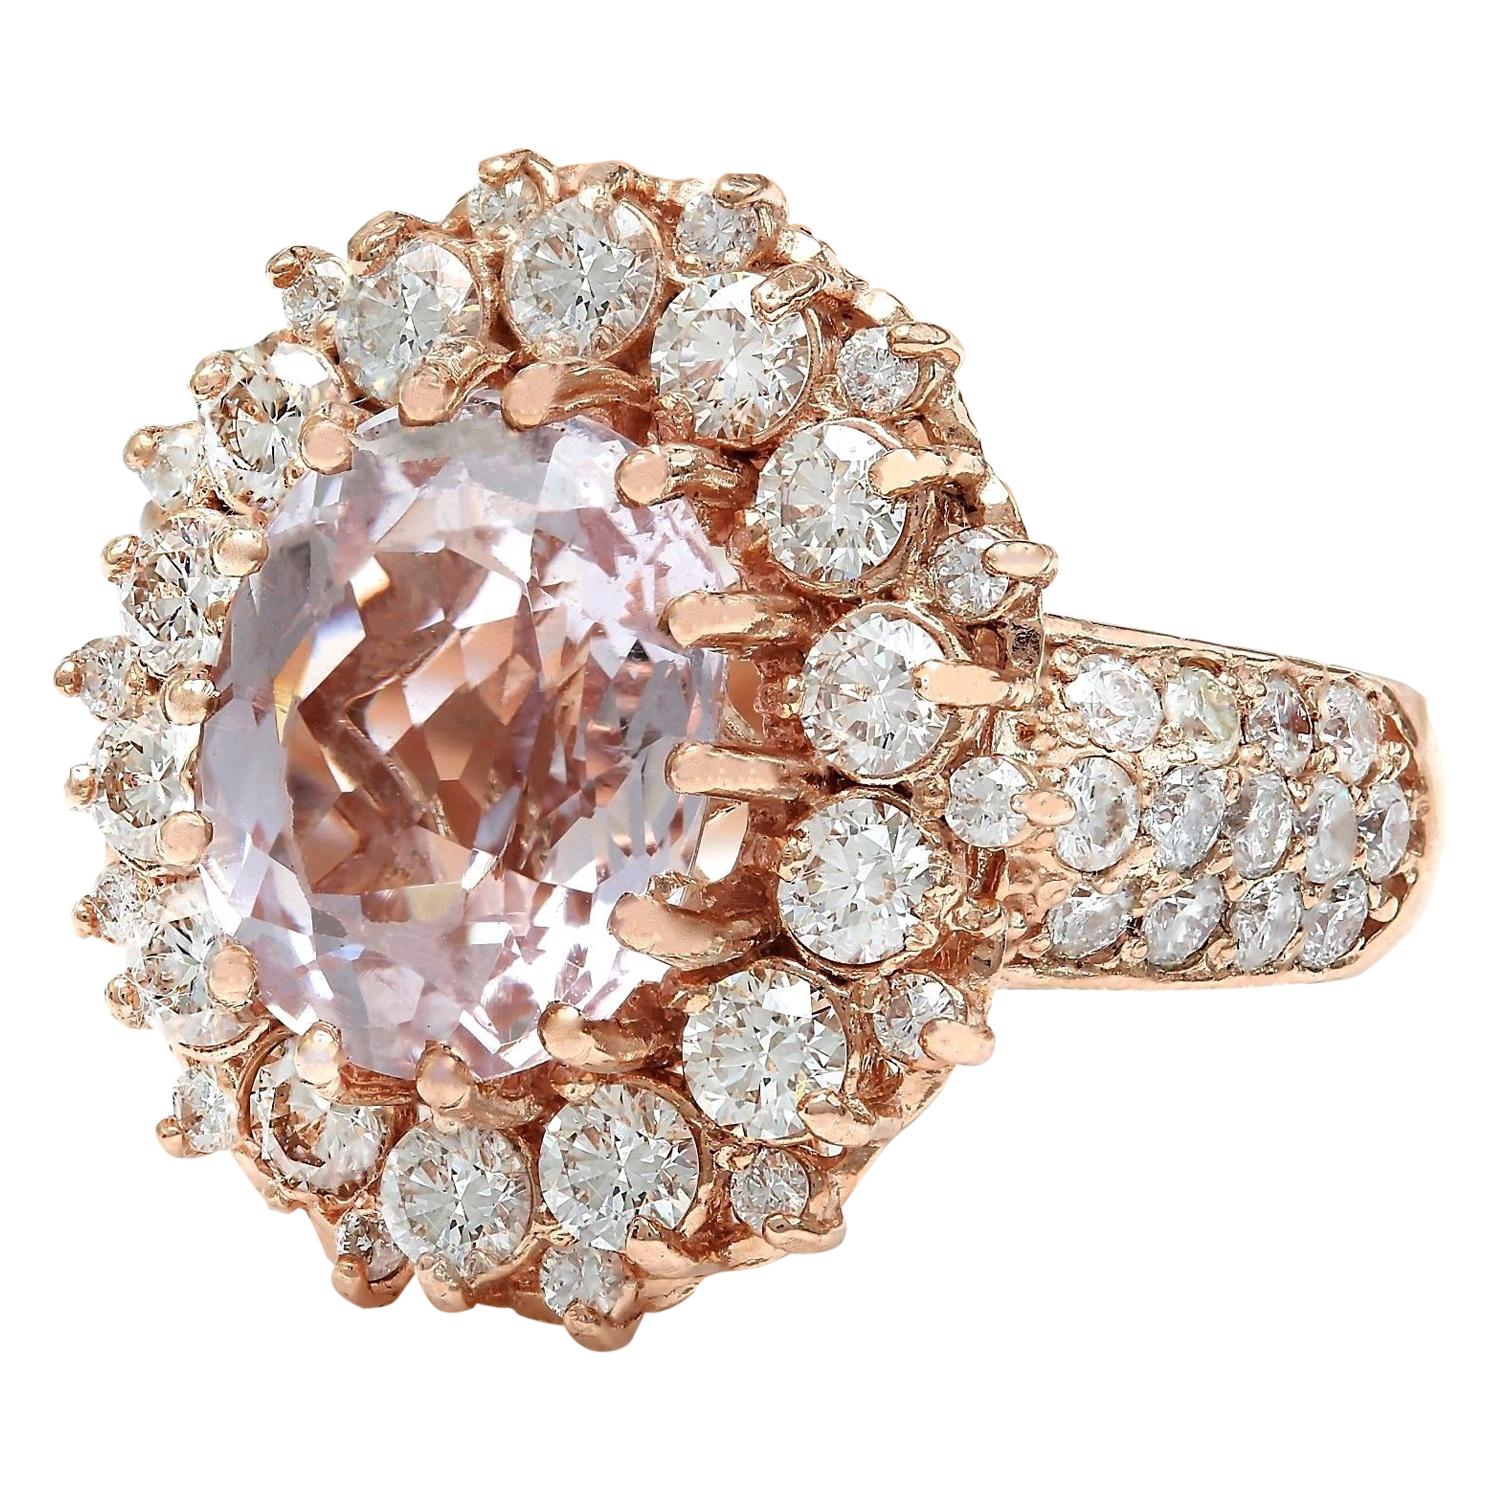 5.86 Carat Natural Kunzite 14K Solid Rose Gold Diamond Ring
 Item Type: Ring
 Item Style: Cocktail
 Material: 14K Rose Gold
 Mainstone: Kunzite
 Stone Color: Pink
 Stone Weight: 3.95 Carat
 Stone Shape: Oval
 Stone Quantity: 1
 Stone Dimensions: